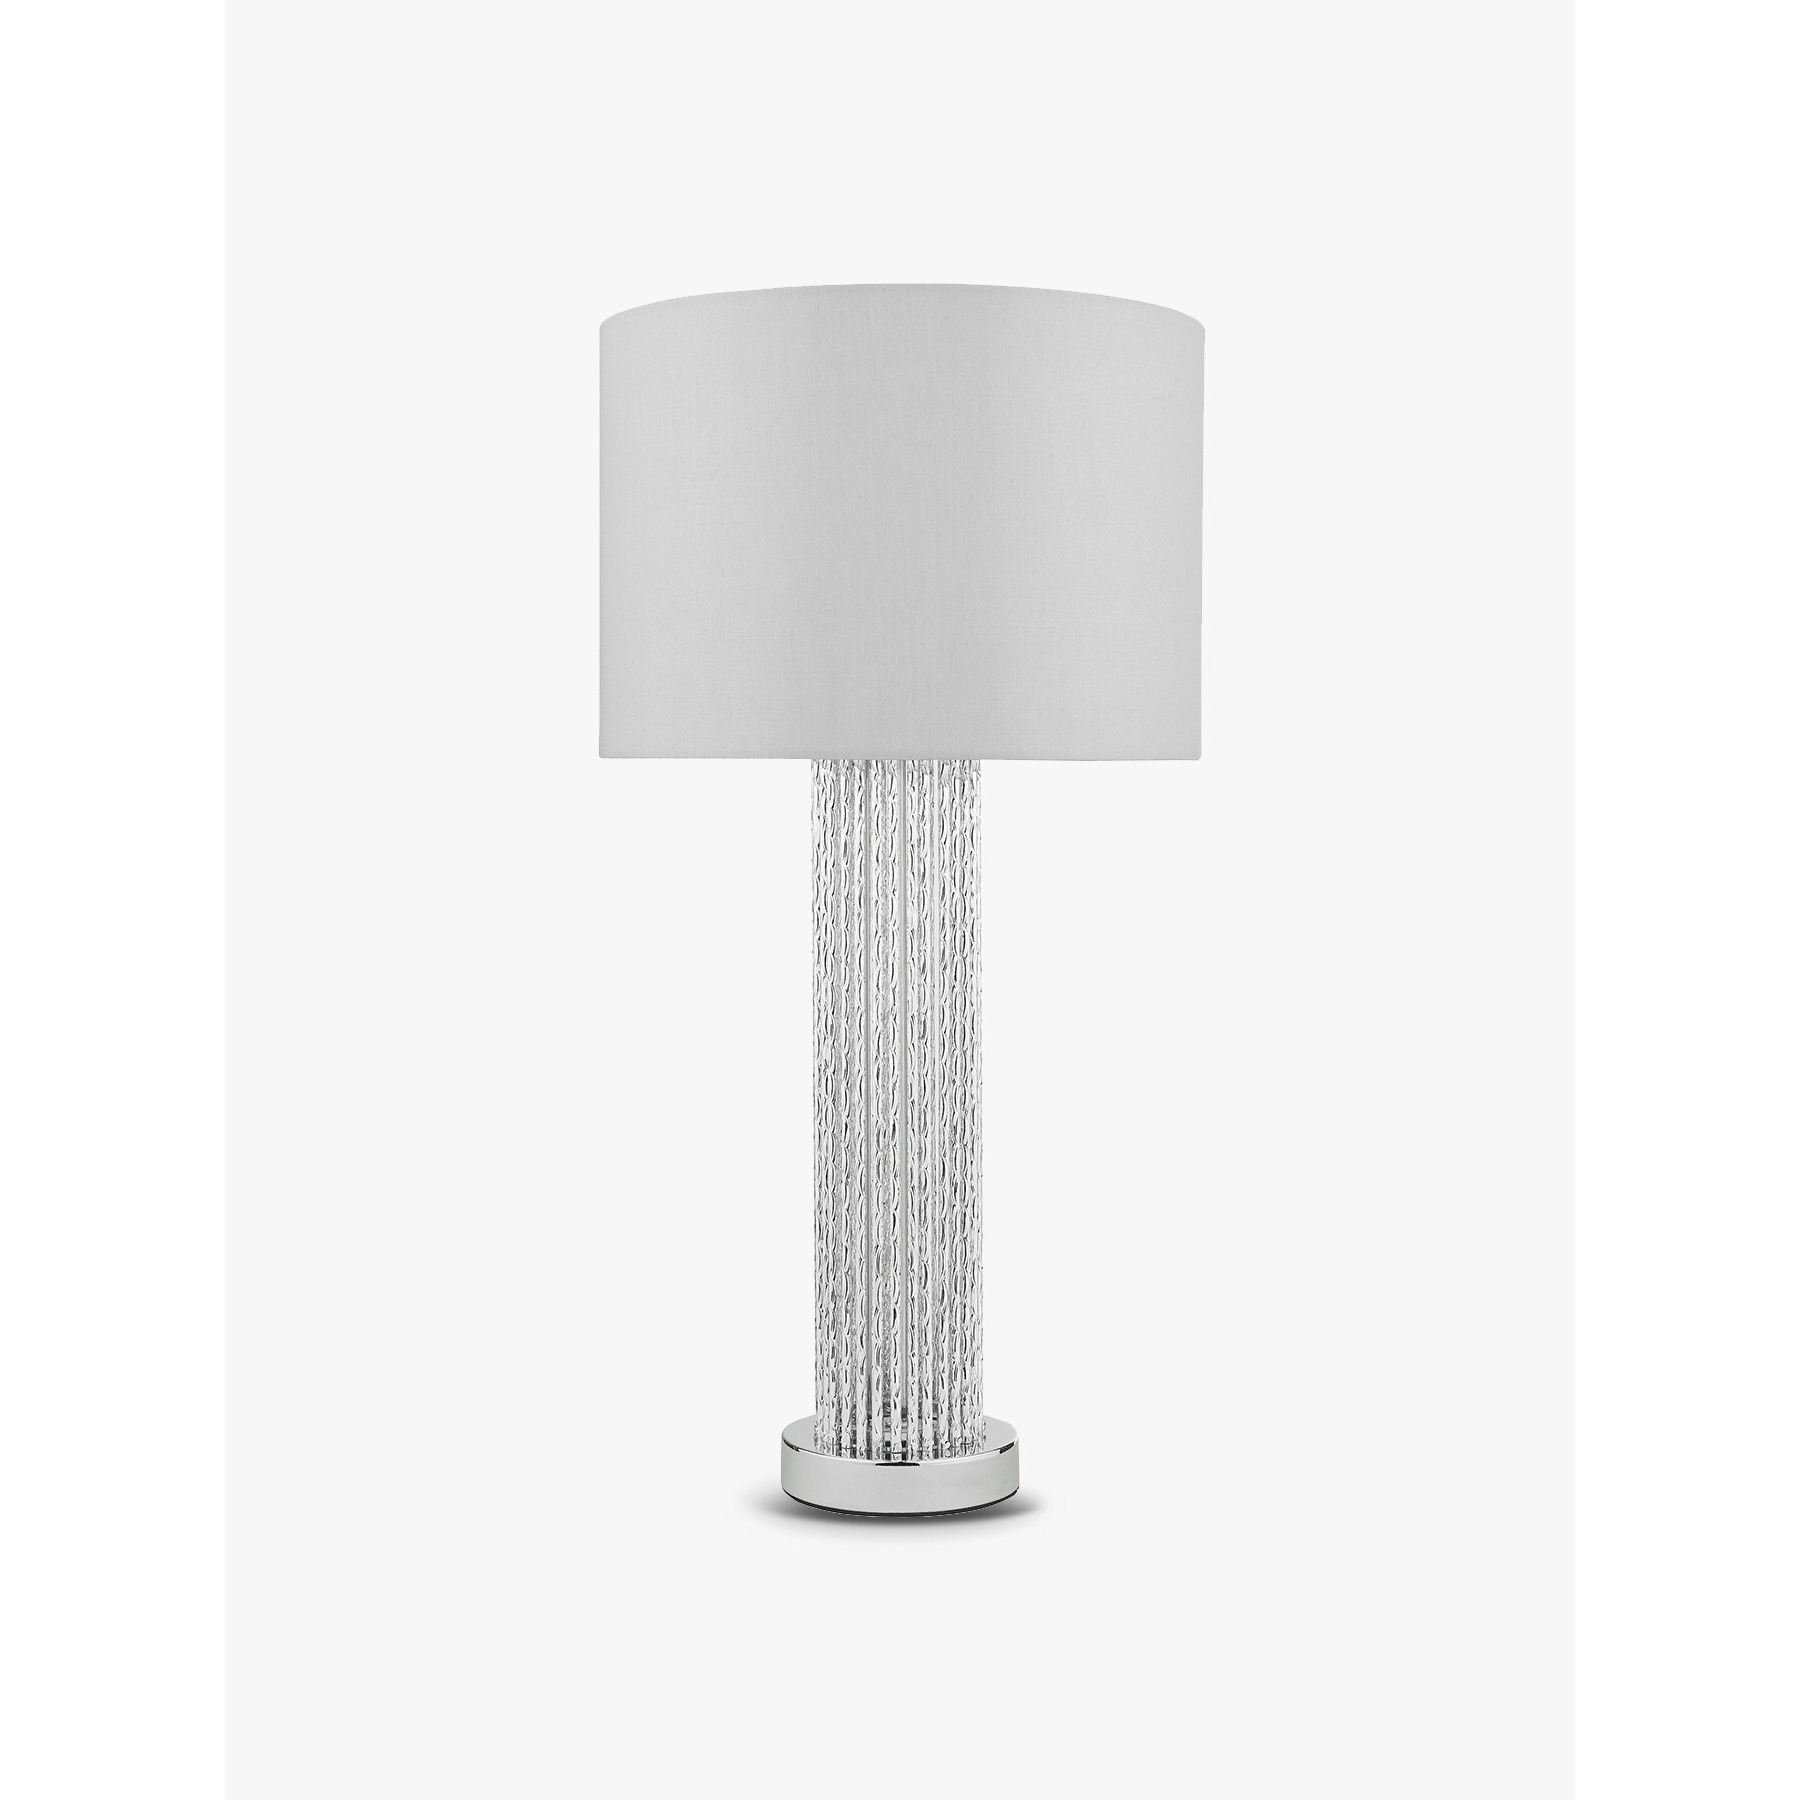 Dar Lighting Lazio Table Lamp with Shade Silver - image 1